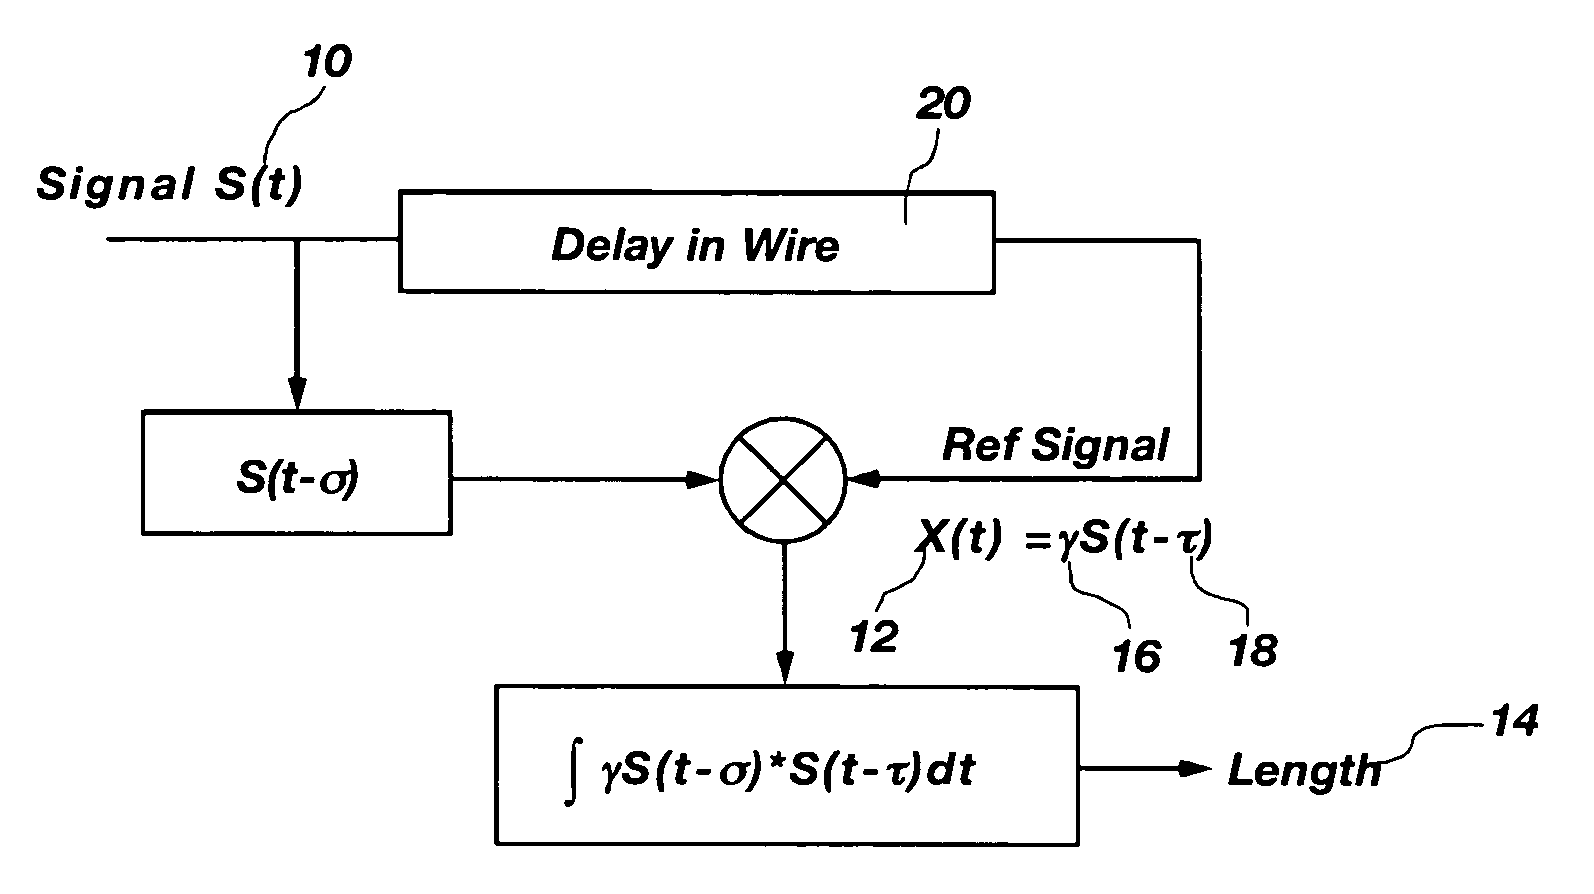 Digital spread spectrum methods and apparatus for testing aircraft wiring